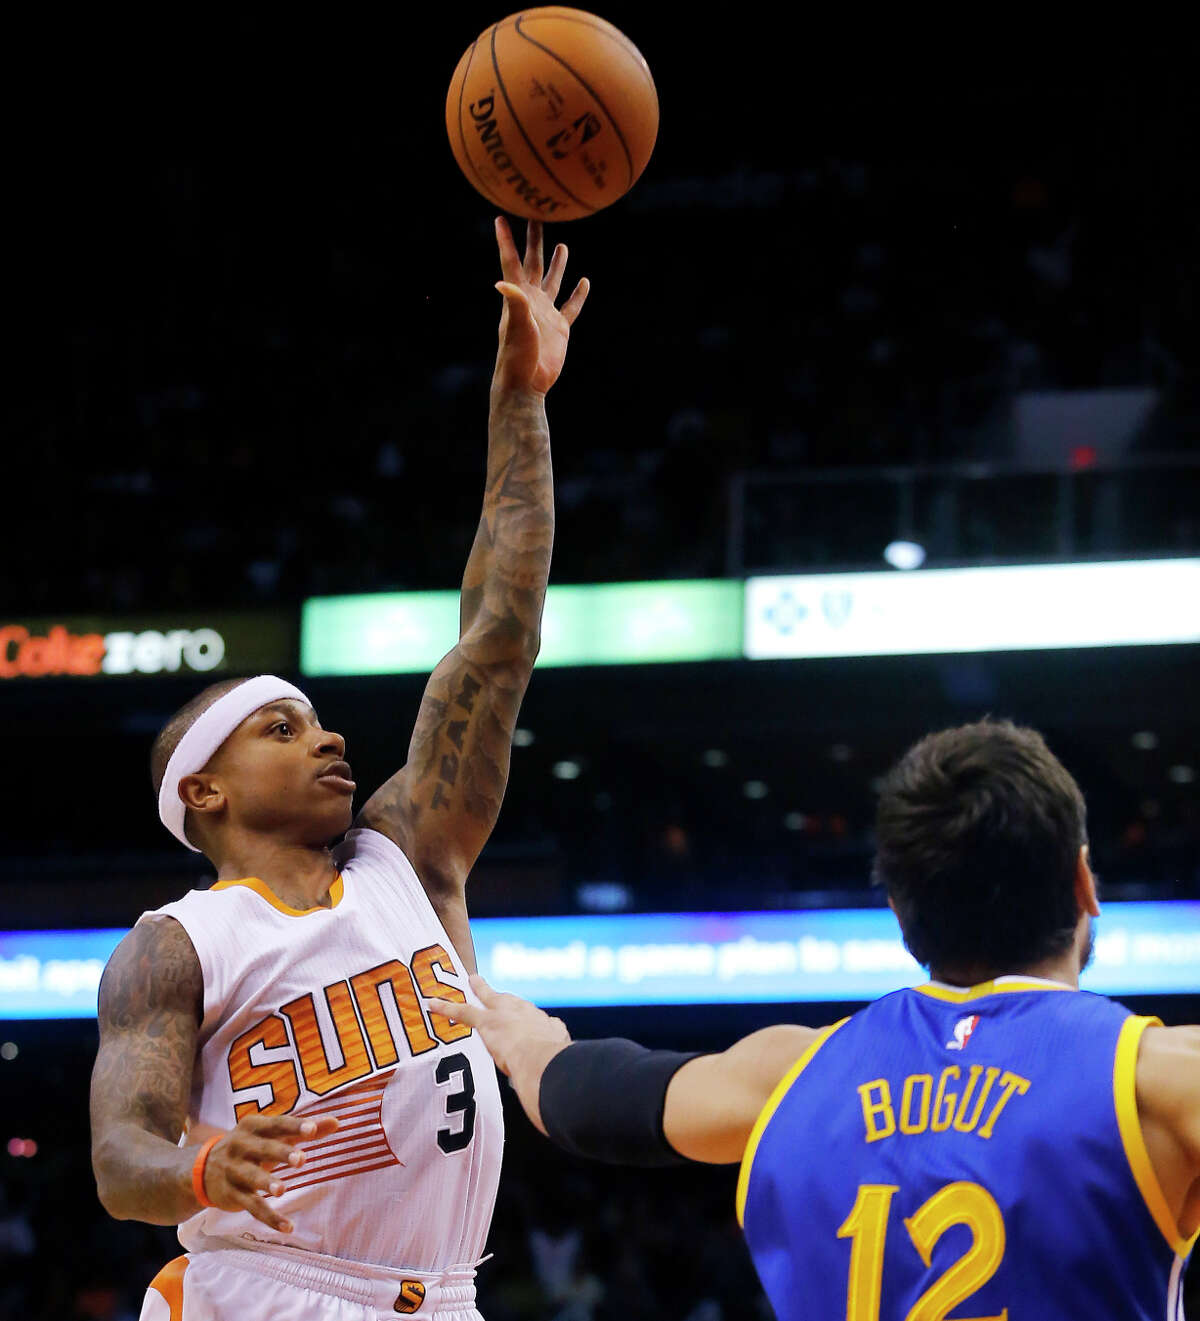 Suns guard Isaiah Thomas shoots over Warriors center Andrew Bogut during the second half. He scored 15 points in the fourth quarter as Phoenix rallied to win.